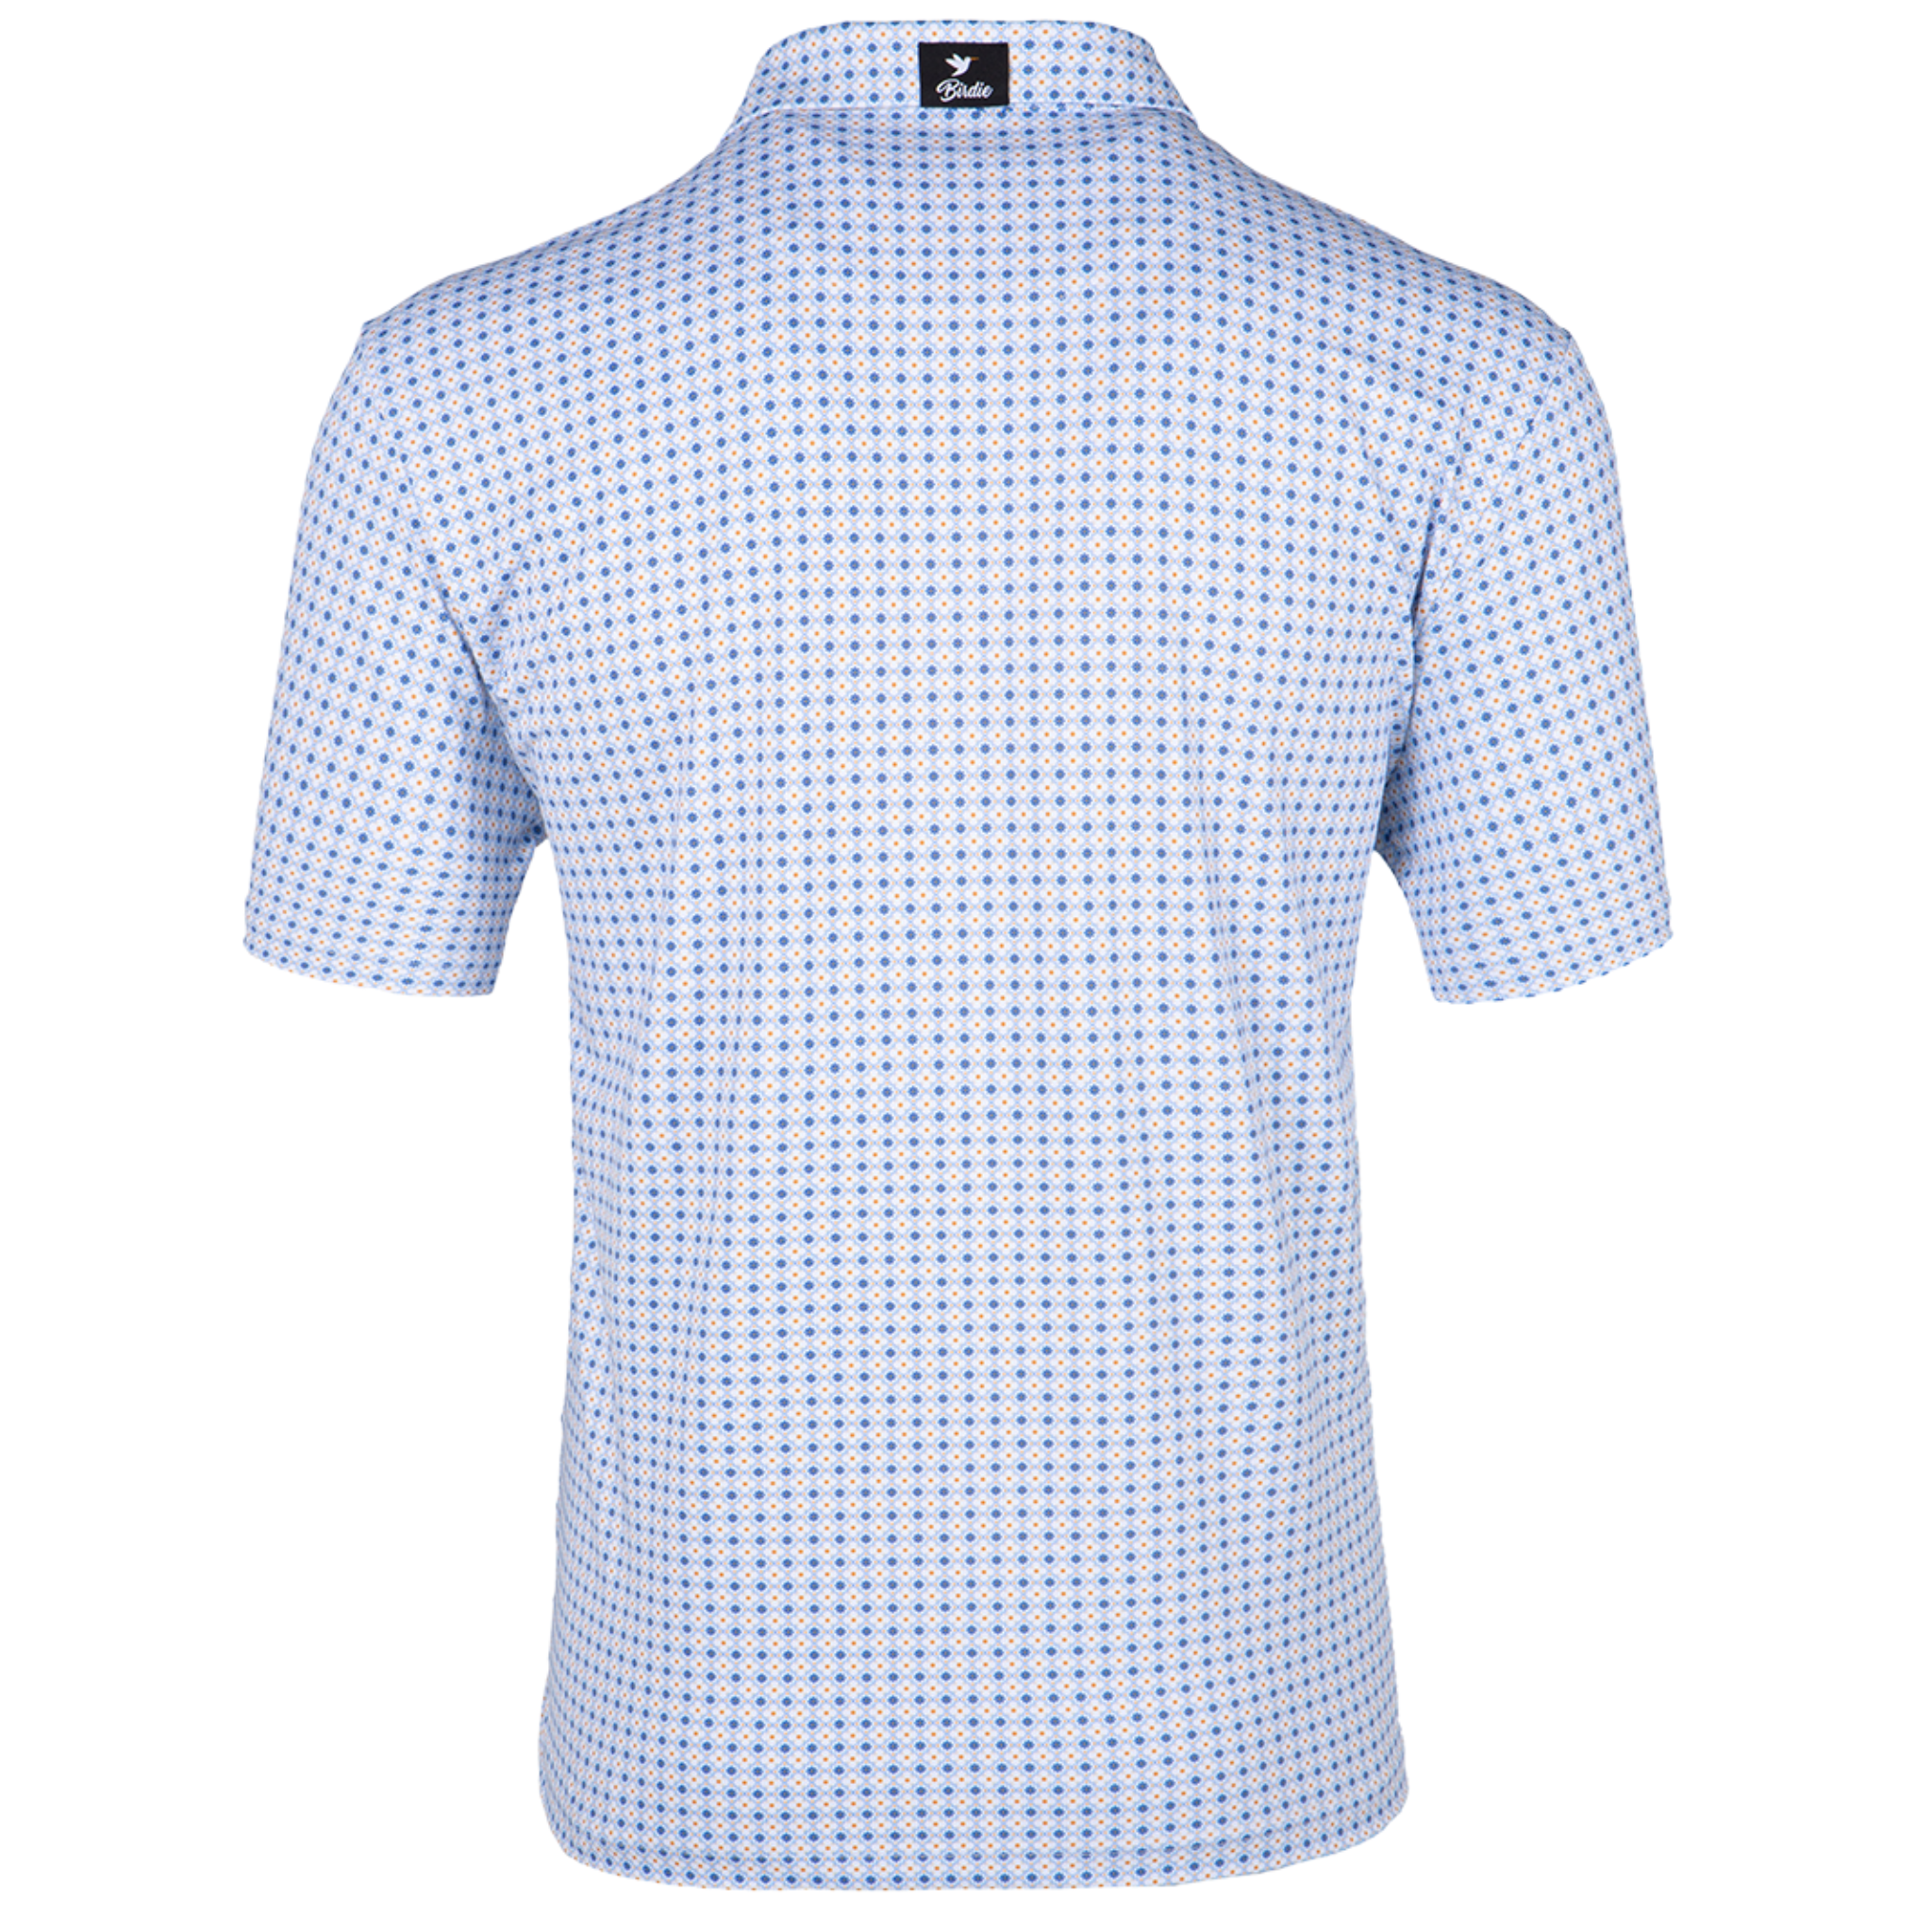 The Azulejo polo shirt from Birdie Threads is crafted with attention to detail, featuring a classic polo collar and a button-down front for a timeless look. The intricate azulejo tile pattern is printed all over the shirt, creating a bold and statement-making design. 